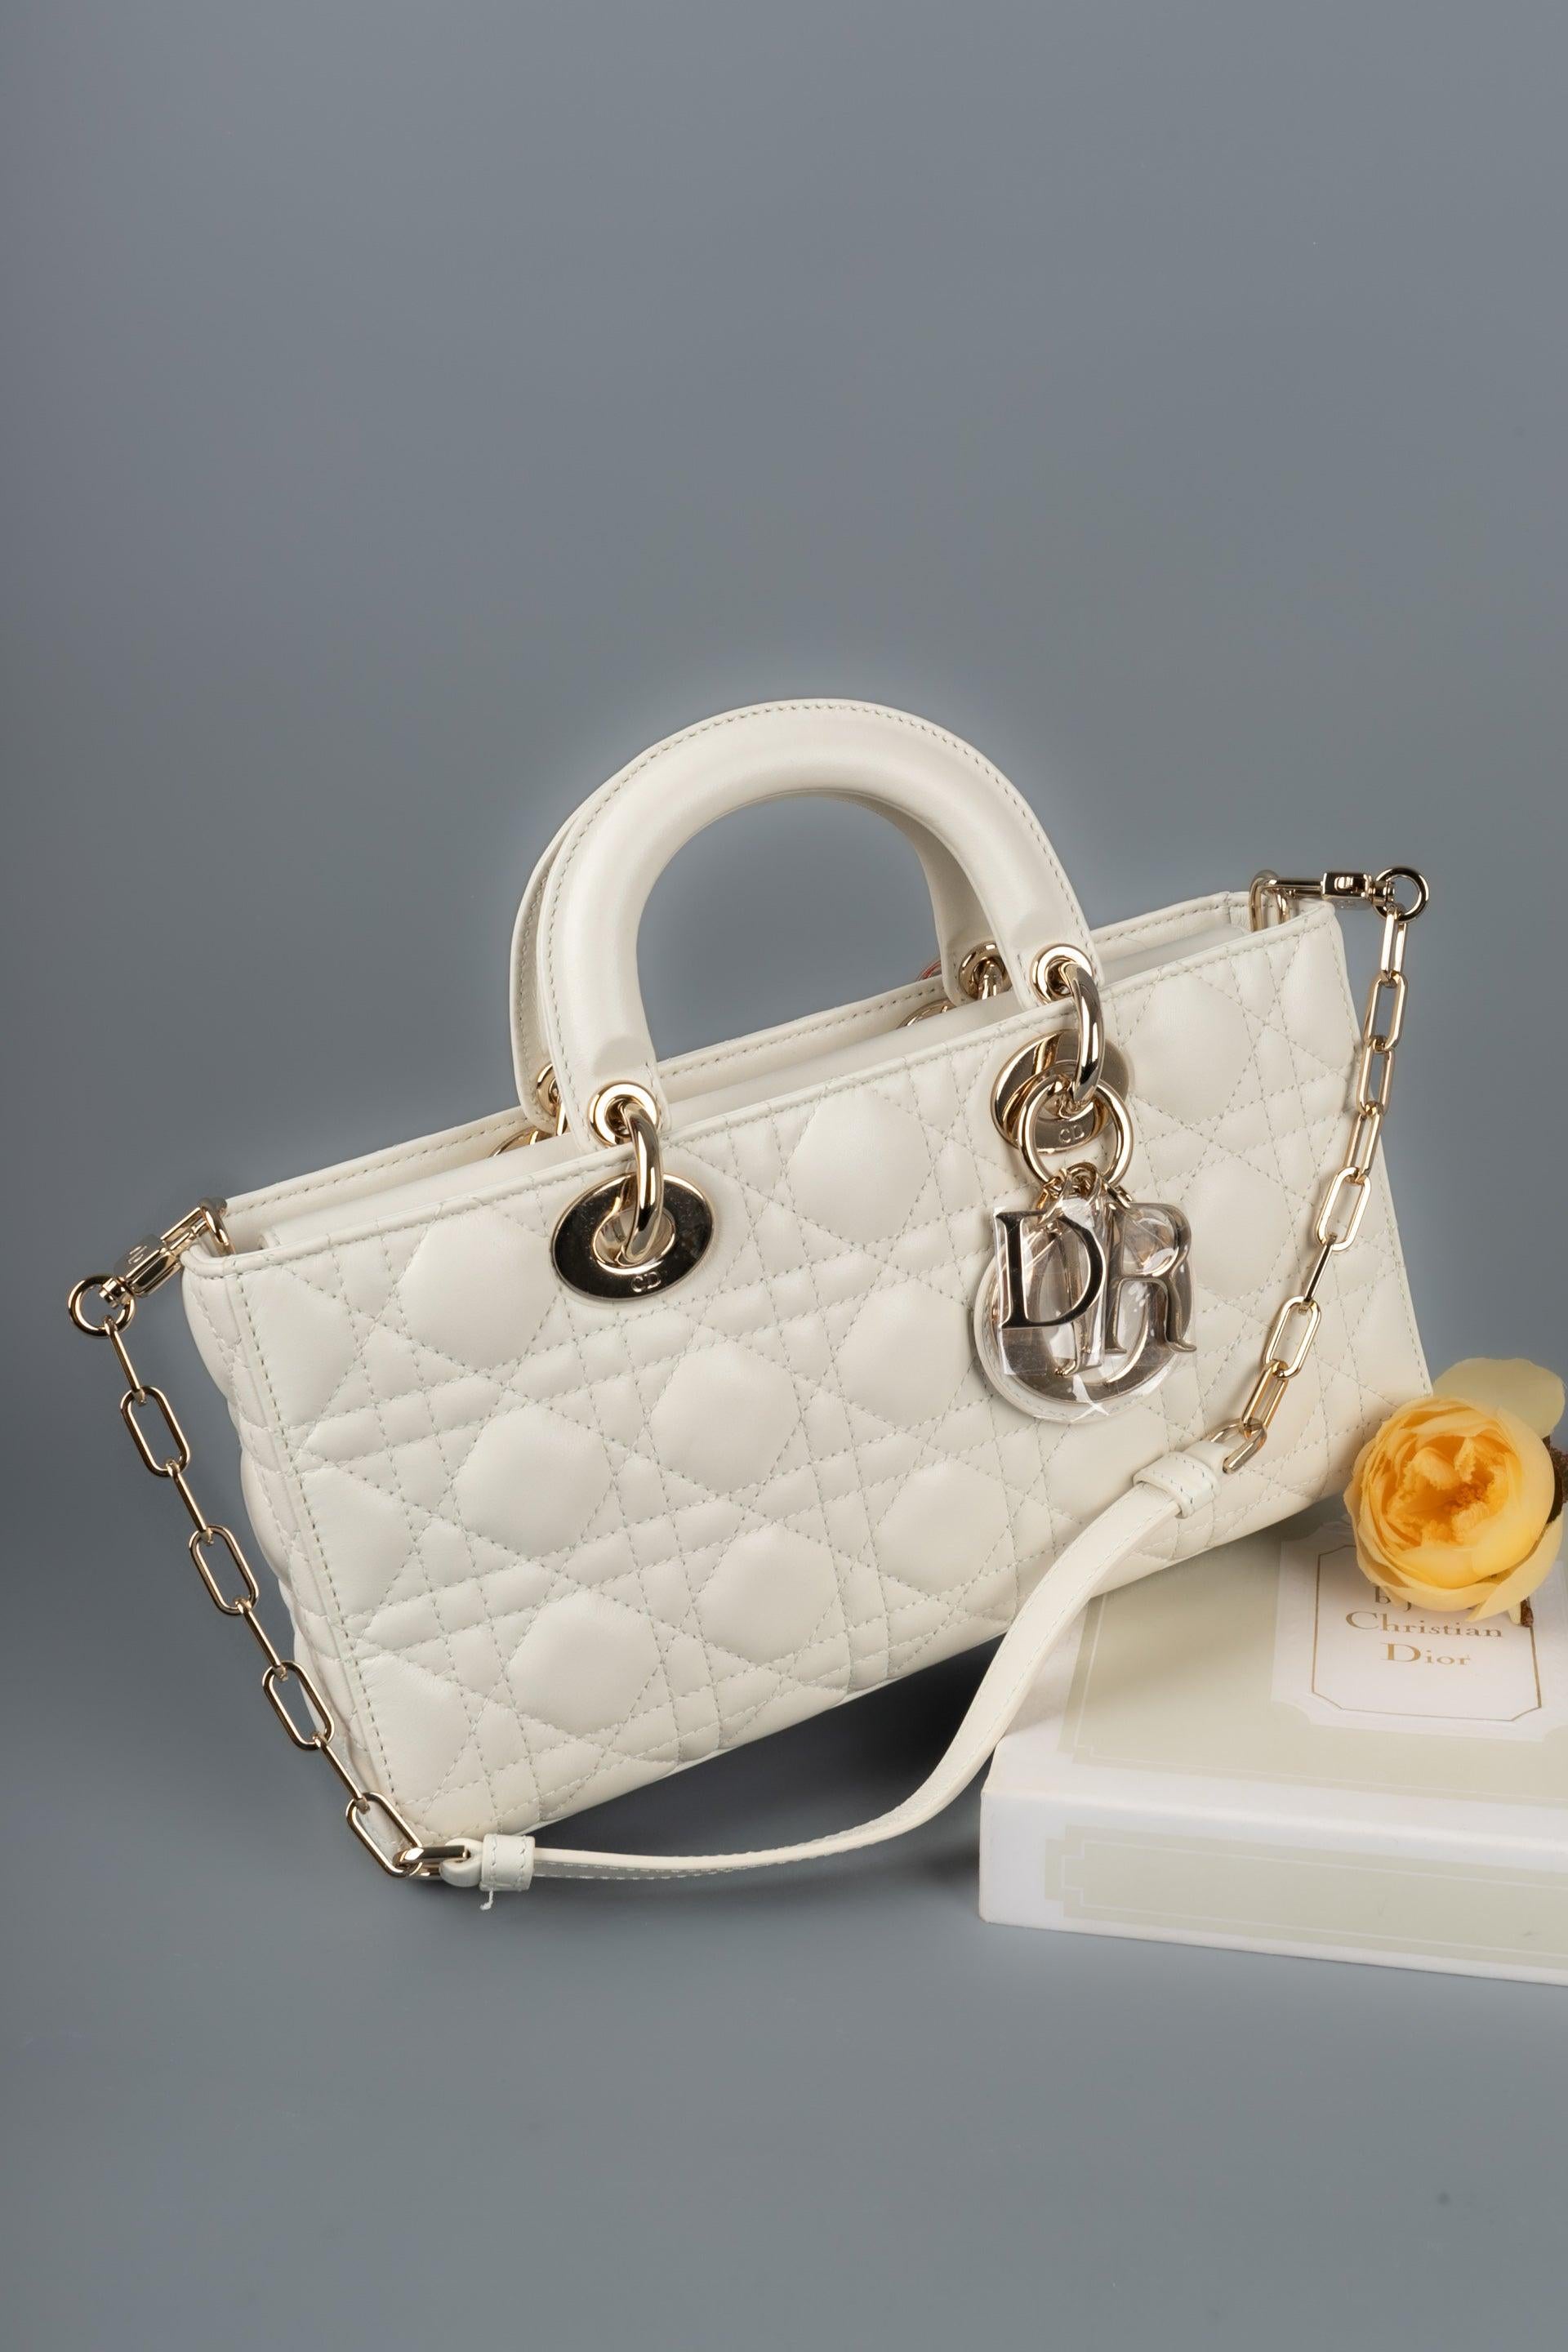 Dior - (Made in Italy) White lambskin bag with champagne metal elements. Lady Dior D-Joy Medium design.

Additional information:
Condition: Very good condition
Dimensions: Length: 26 cm - Height: 13.5cm - Depth: 5 cm - Handle: 55 cm

Seller